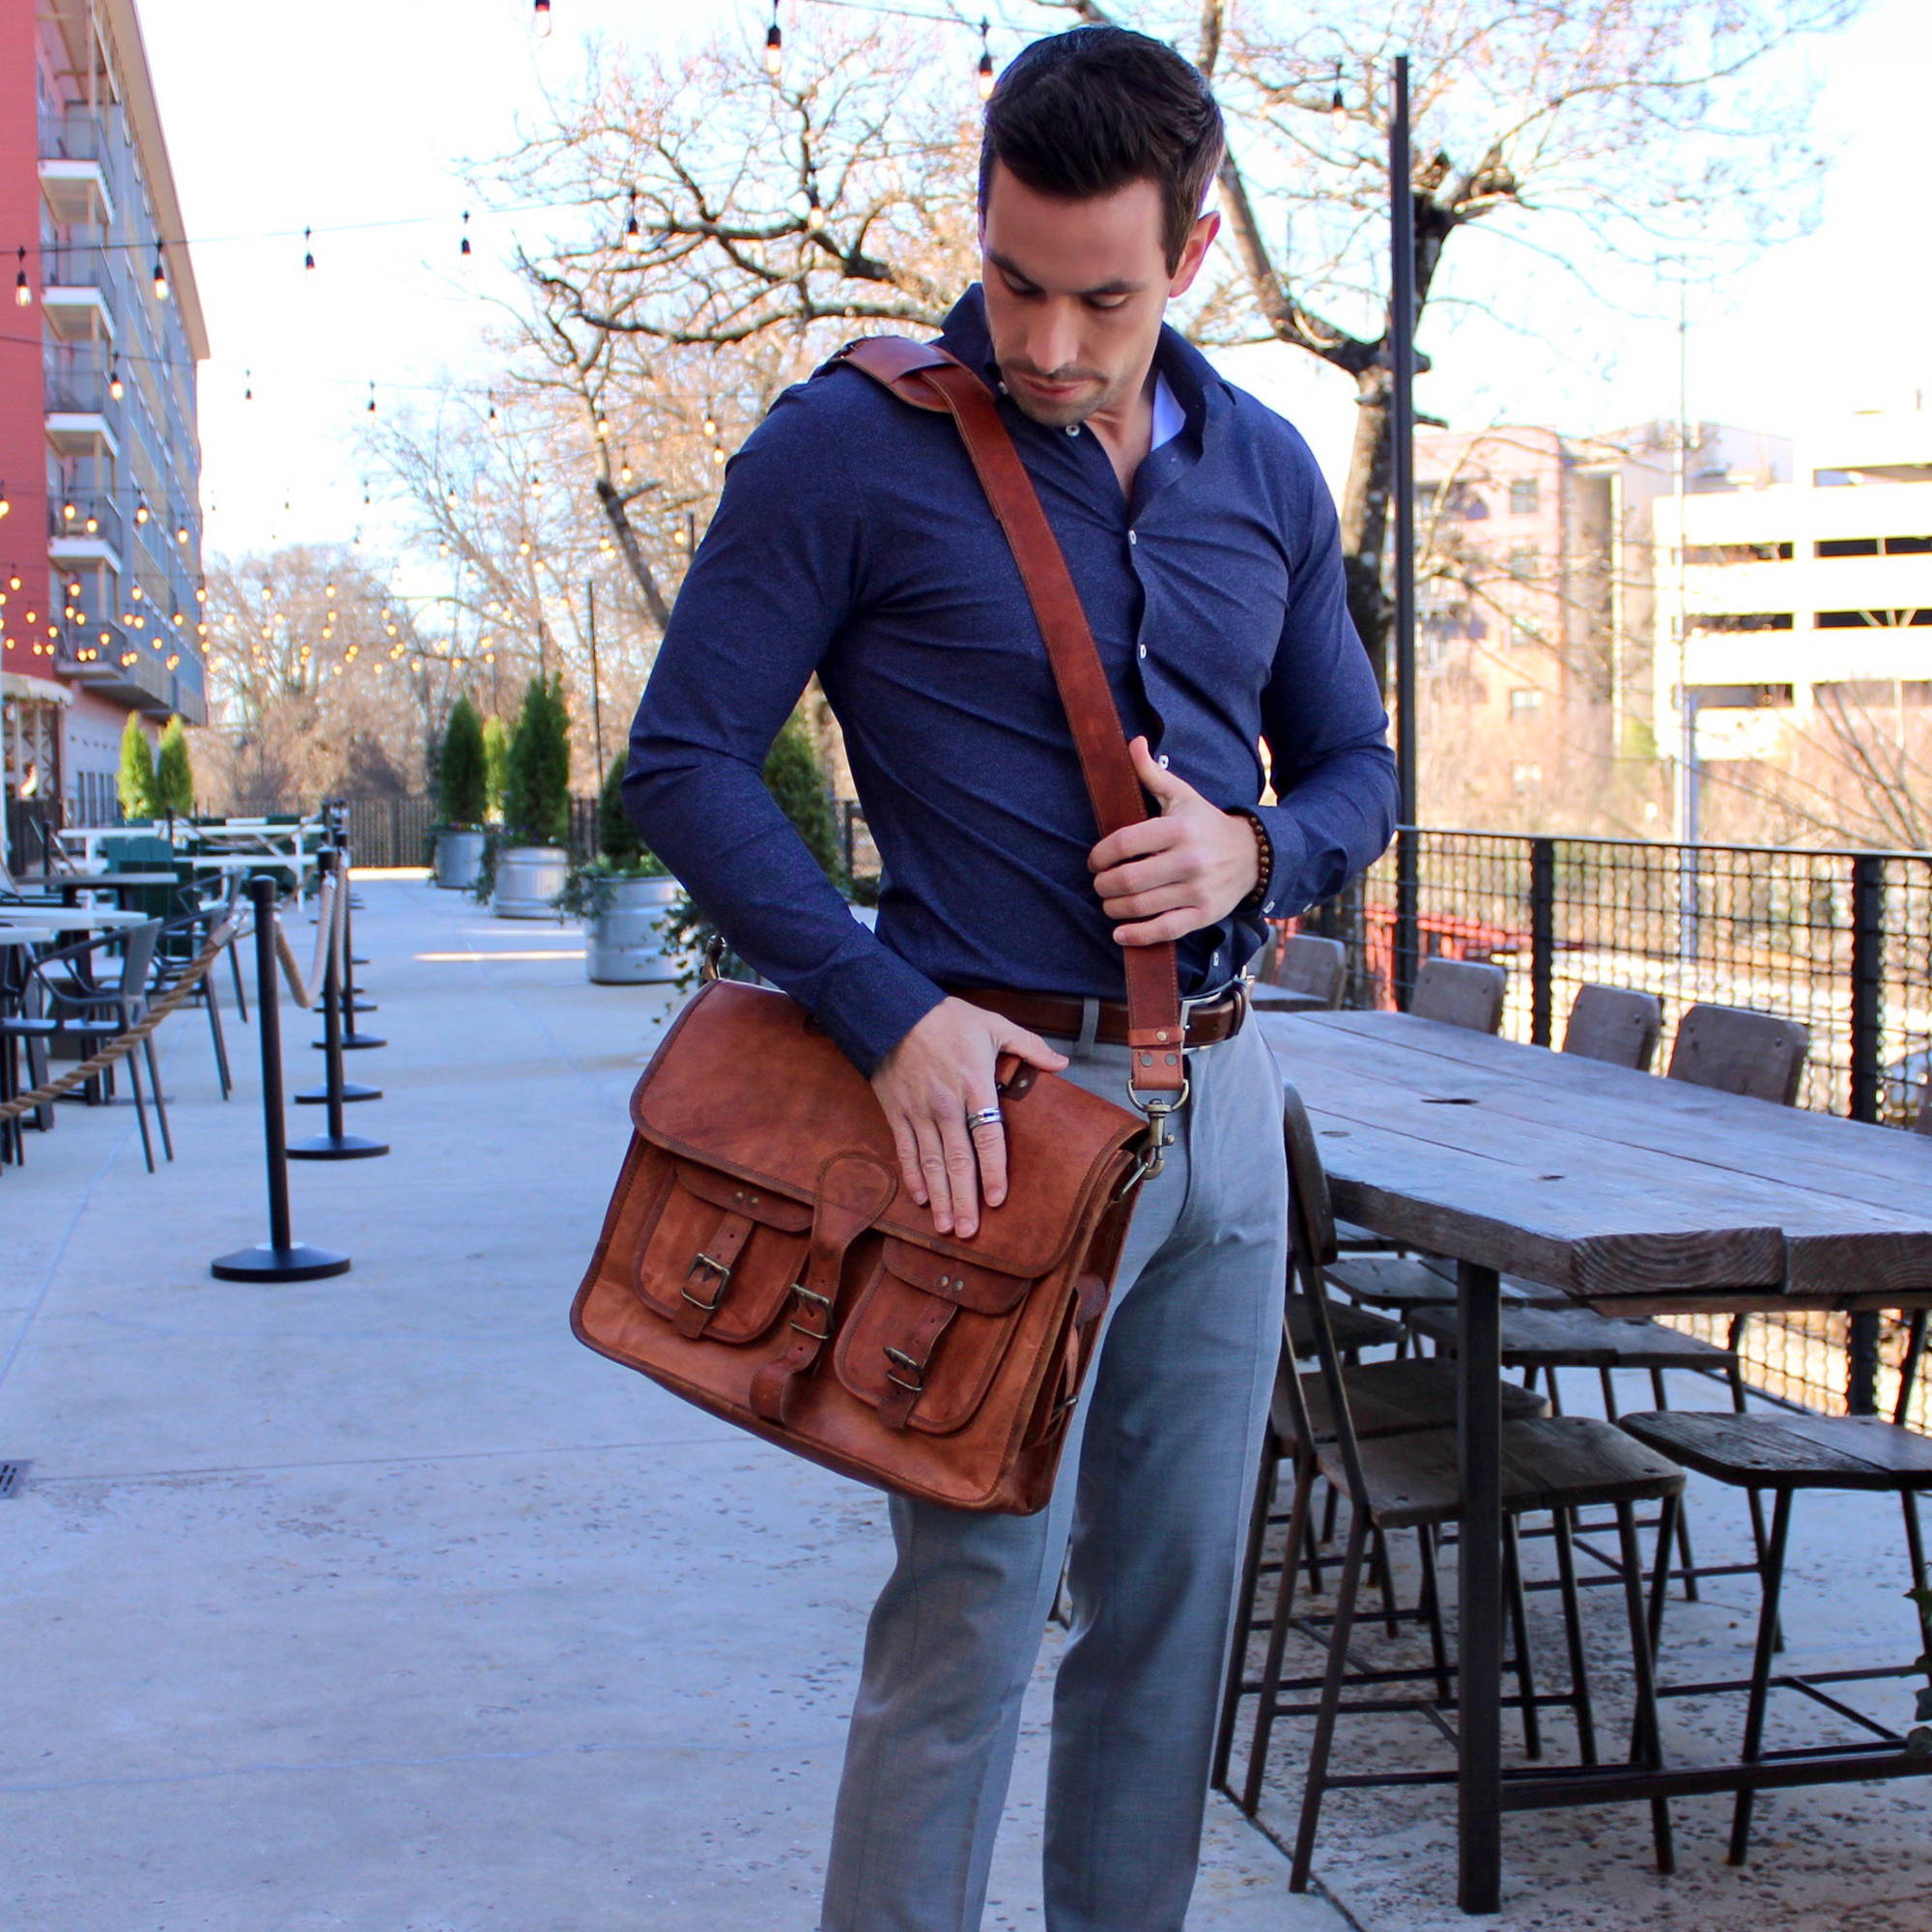 the indy leather messenger bag for men the real leather company